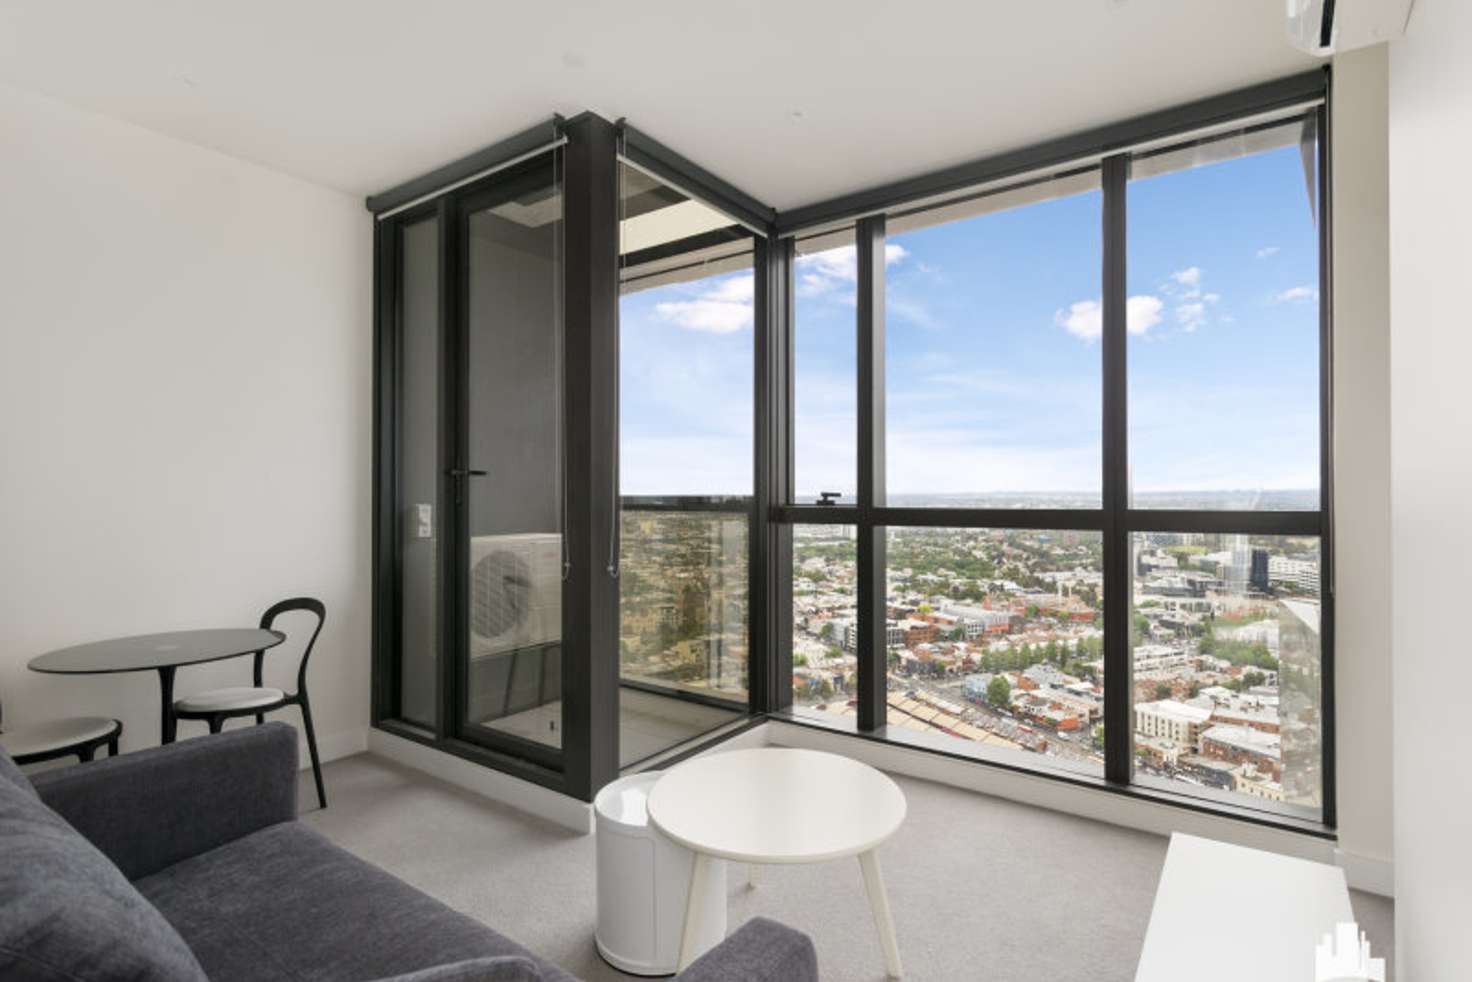 Main view of Homely apartment listing, 3904/120 Abeckett Street, Melbourne VIC 3000